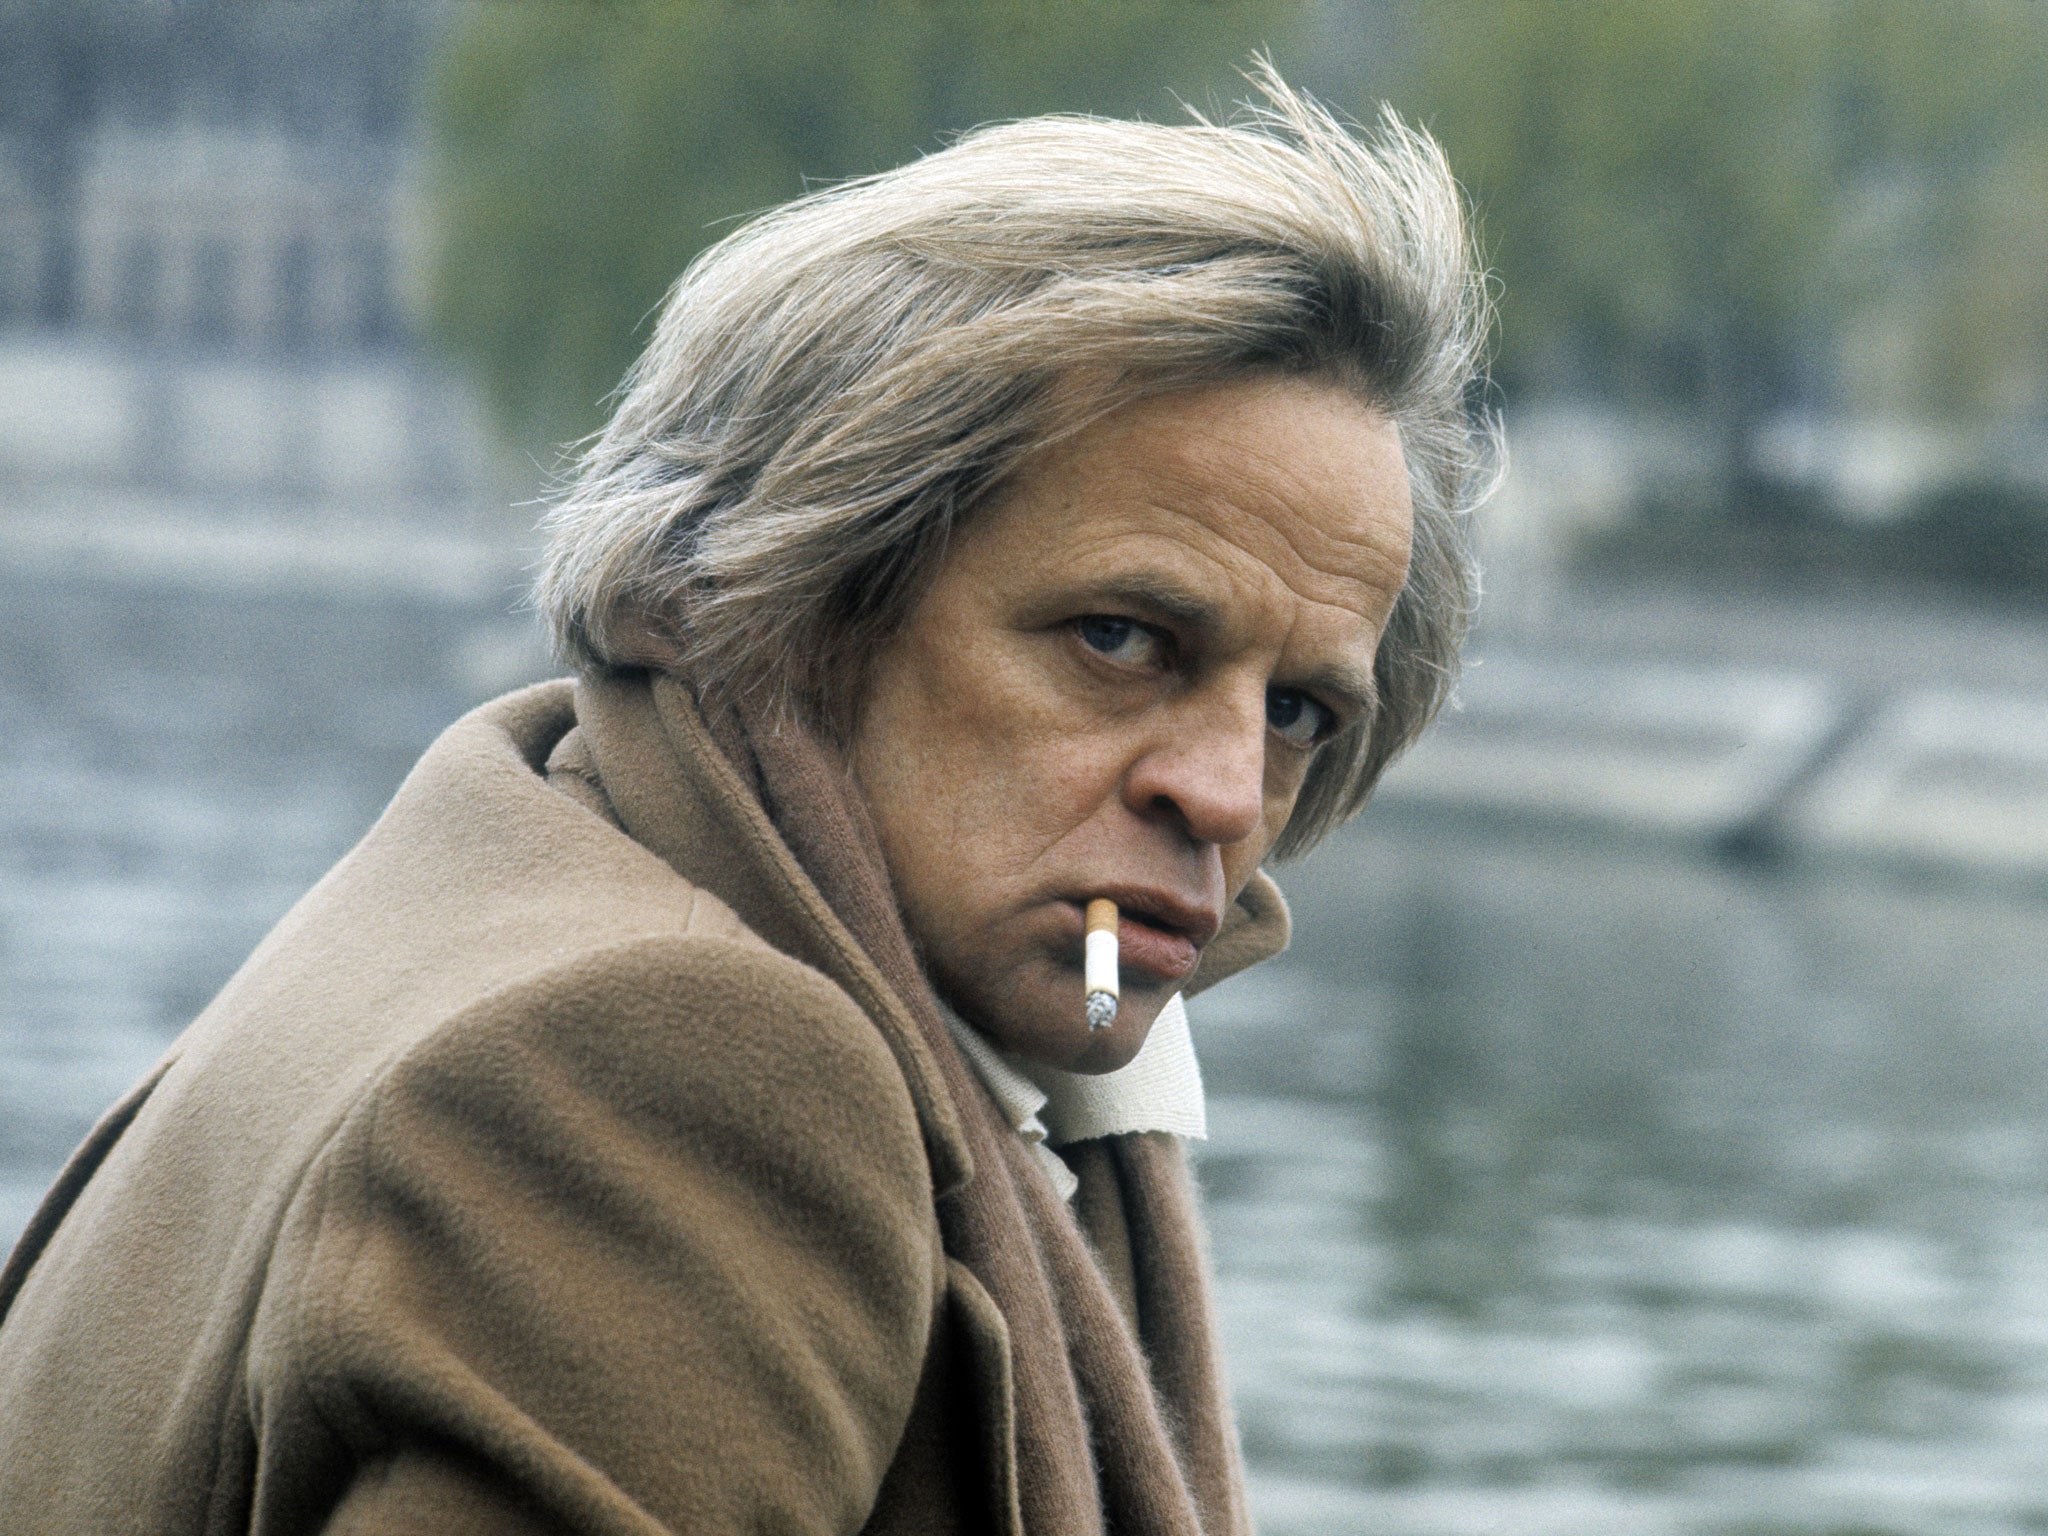 German Actor Klaus Kinski Accused Of Raping His Daughter The Independent